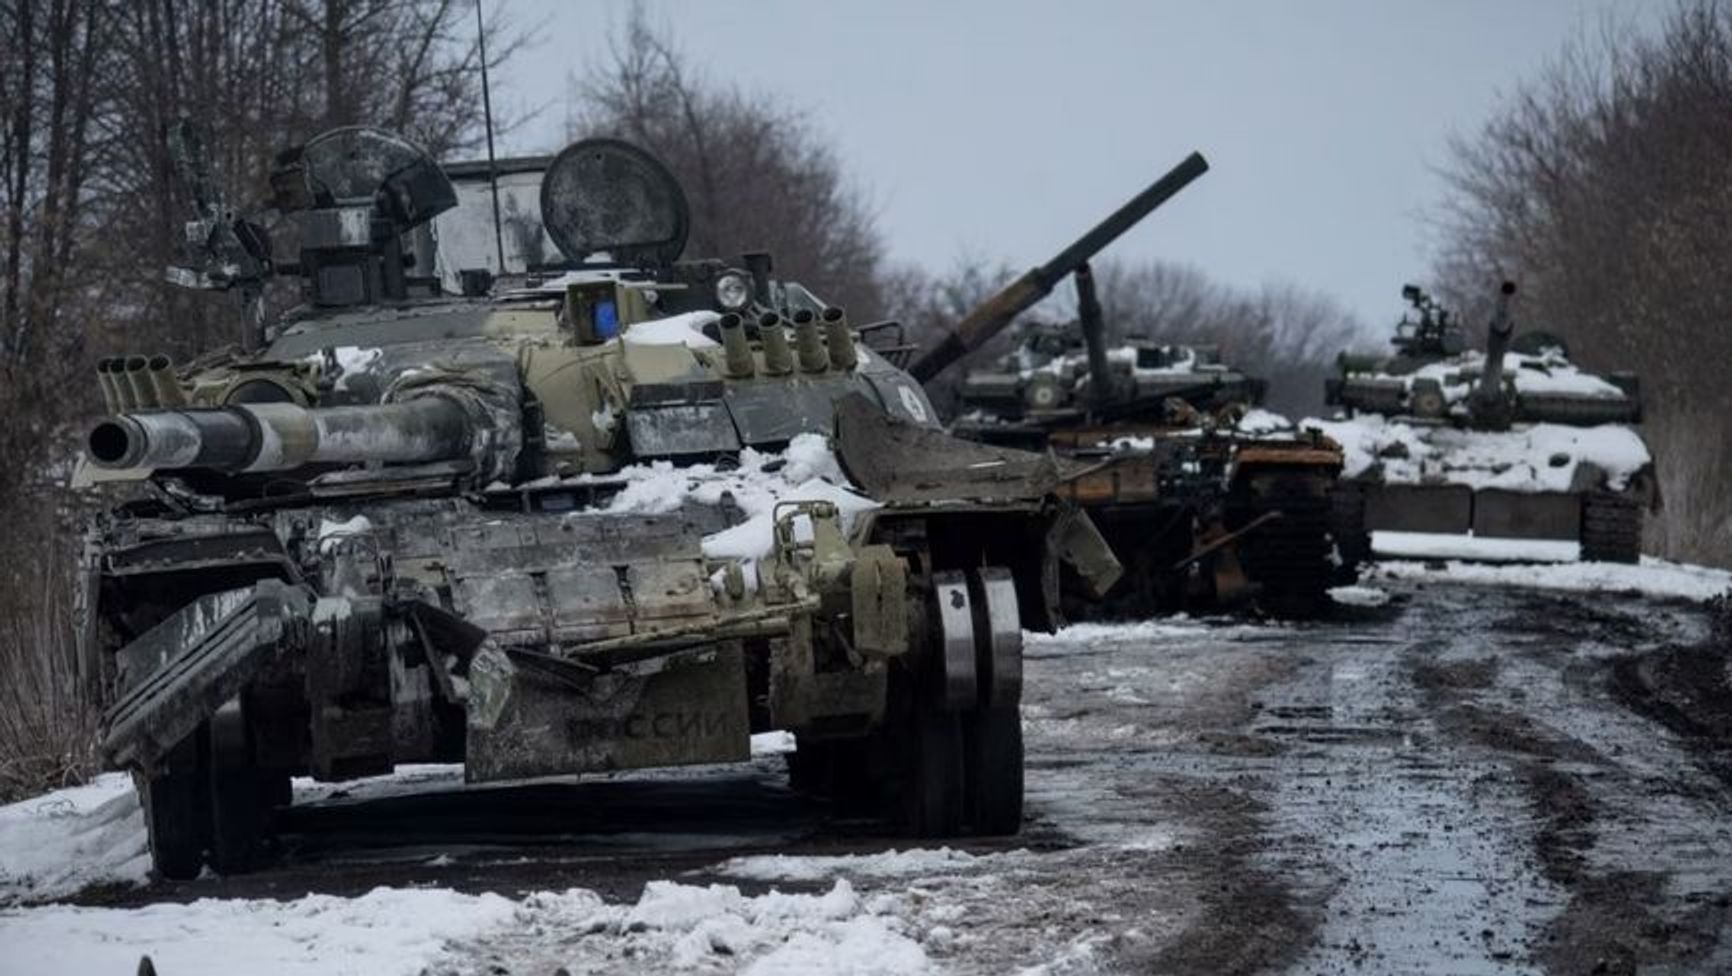 A destroyed Russian tank column in the Sumy region of Ukraine, March 7, 2022